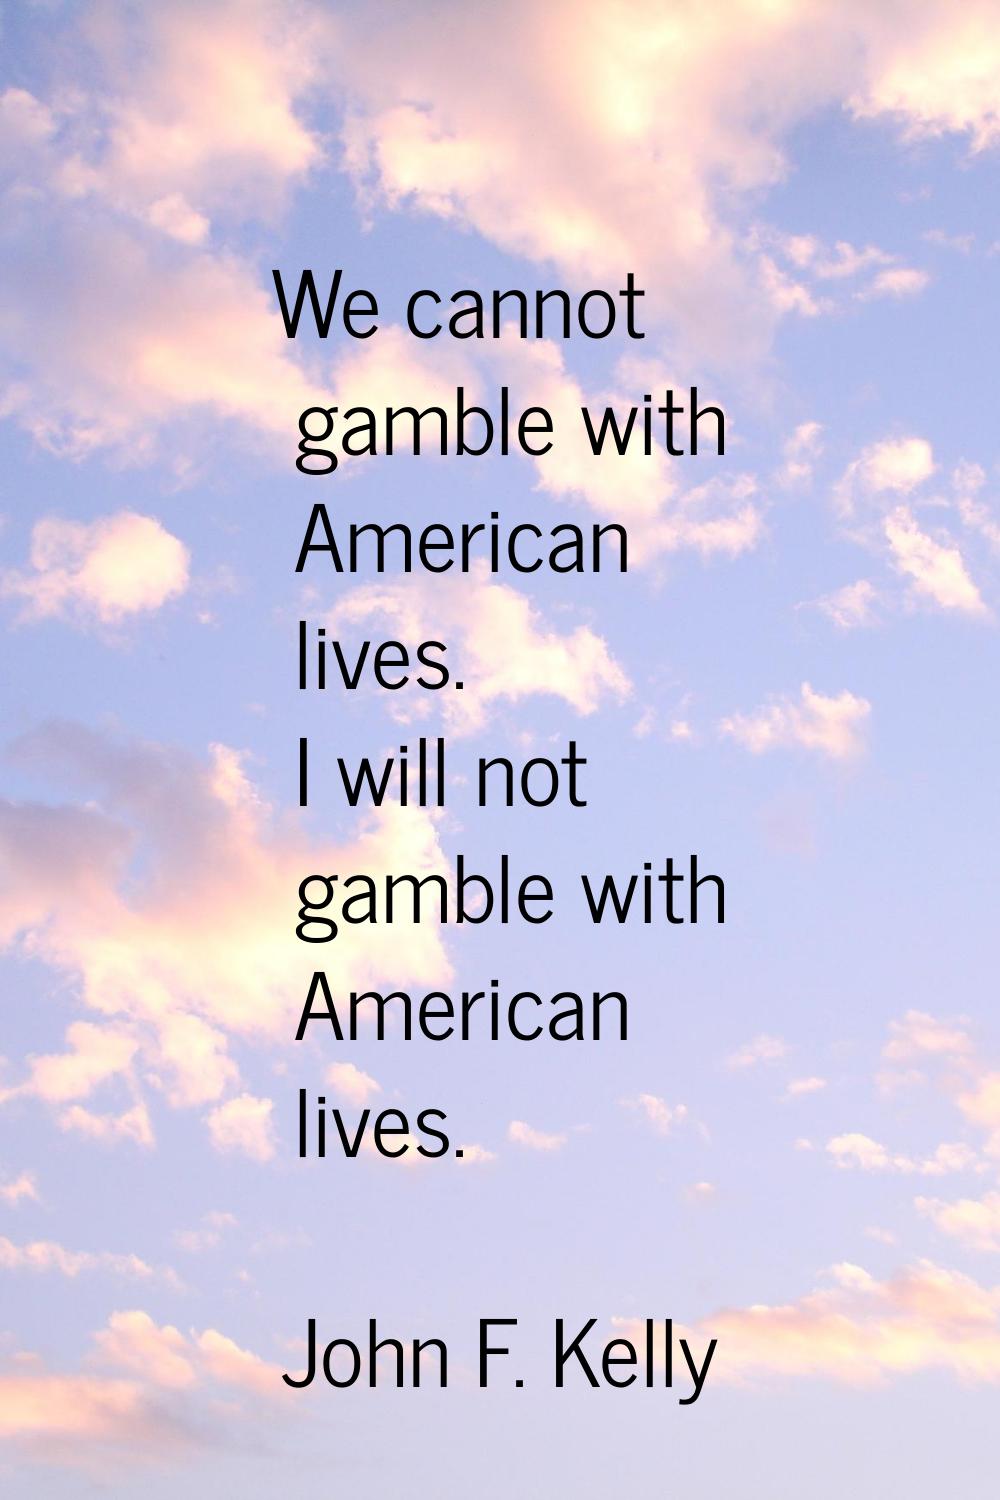 We cannot gamble with American lives. I will not gamble with American lives.